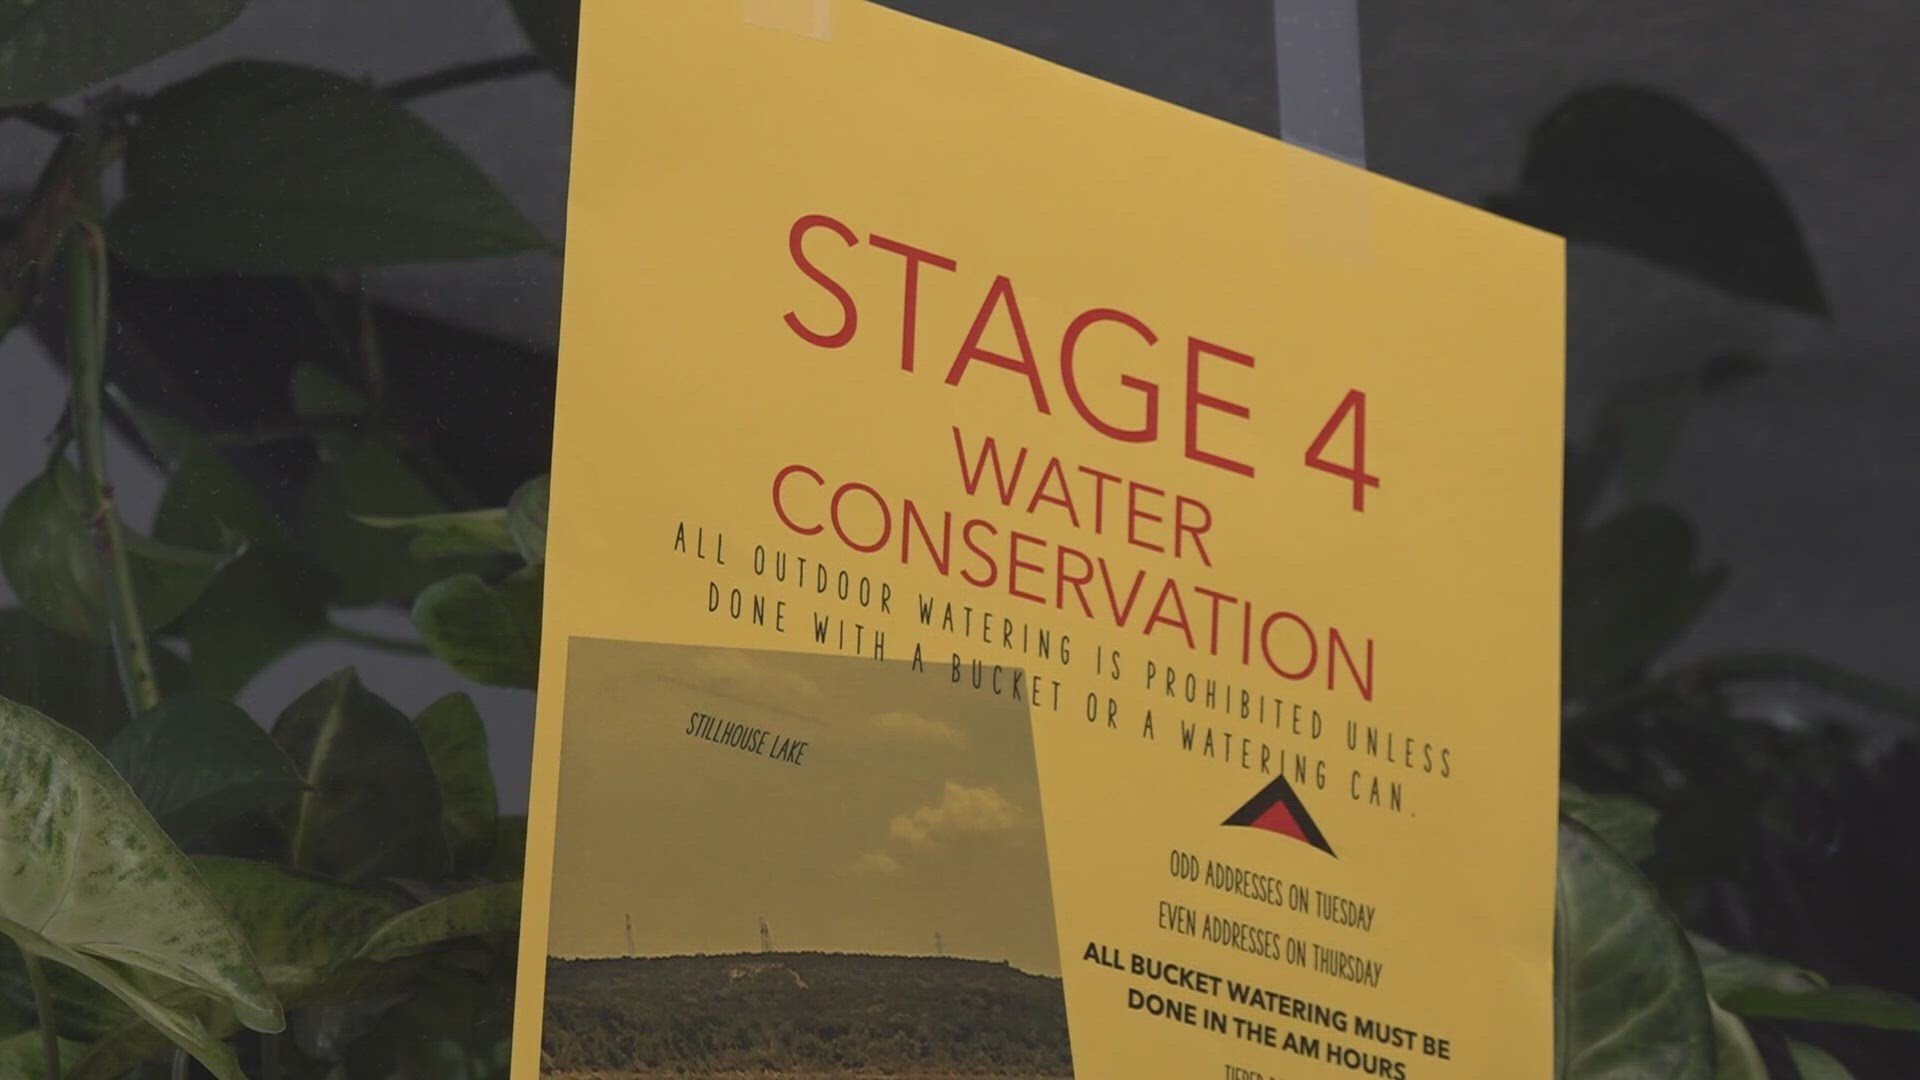 For the new Water Conservation Plan, City leaders are taking recent drought conditions into account and preparing for more people to move to the area.